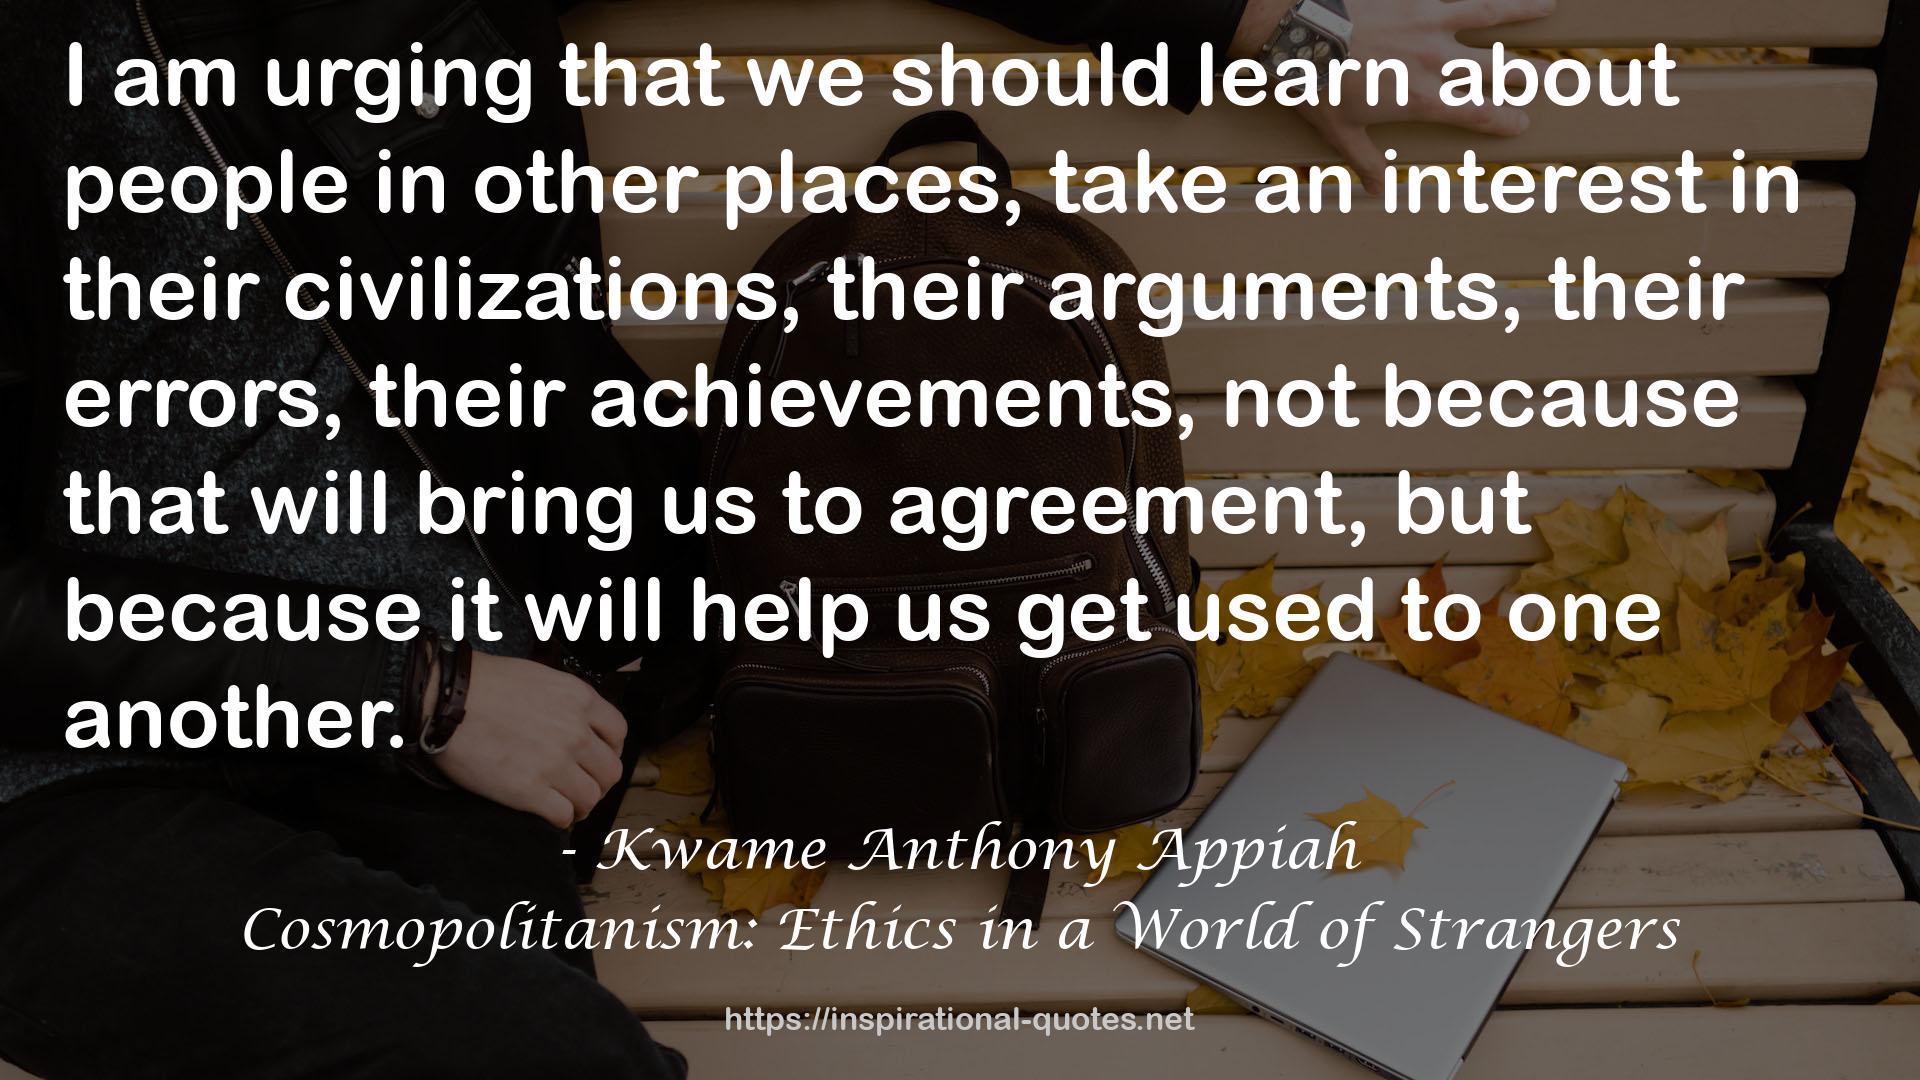 Cosmopolitanism: Ethics in a World of Strangers QUOTES